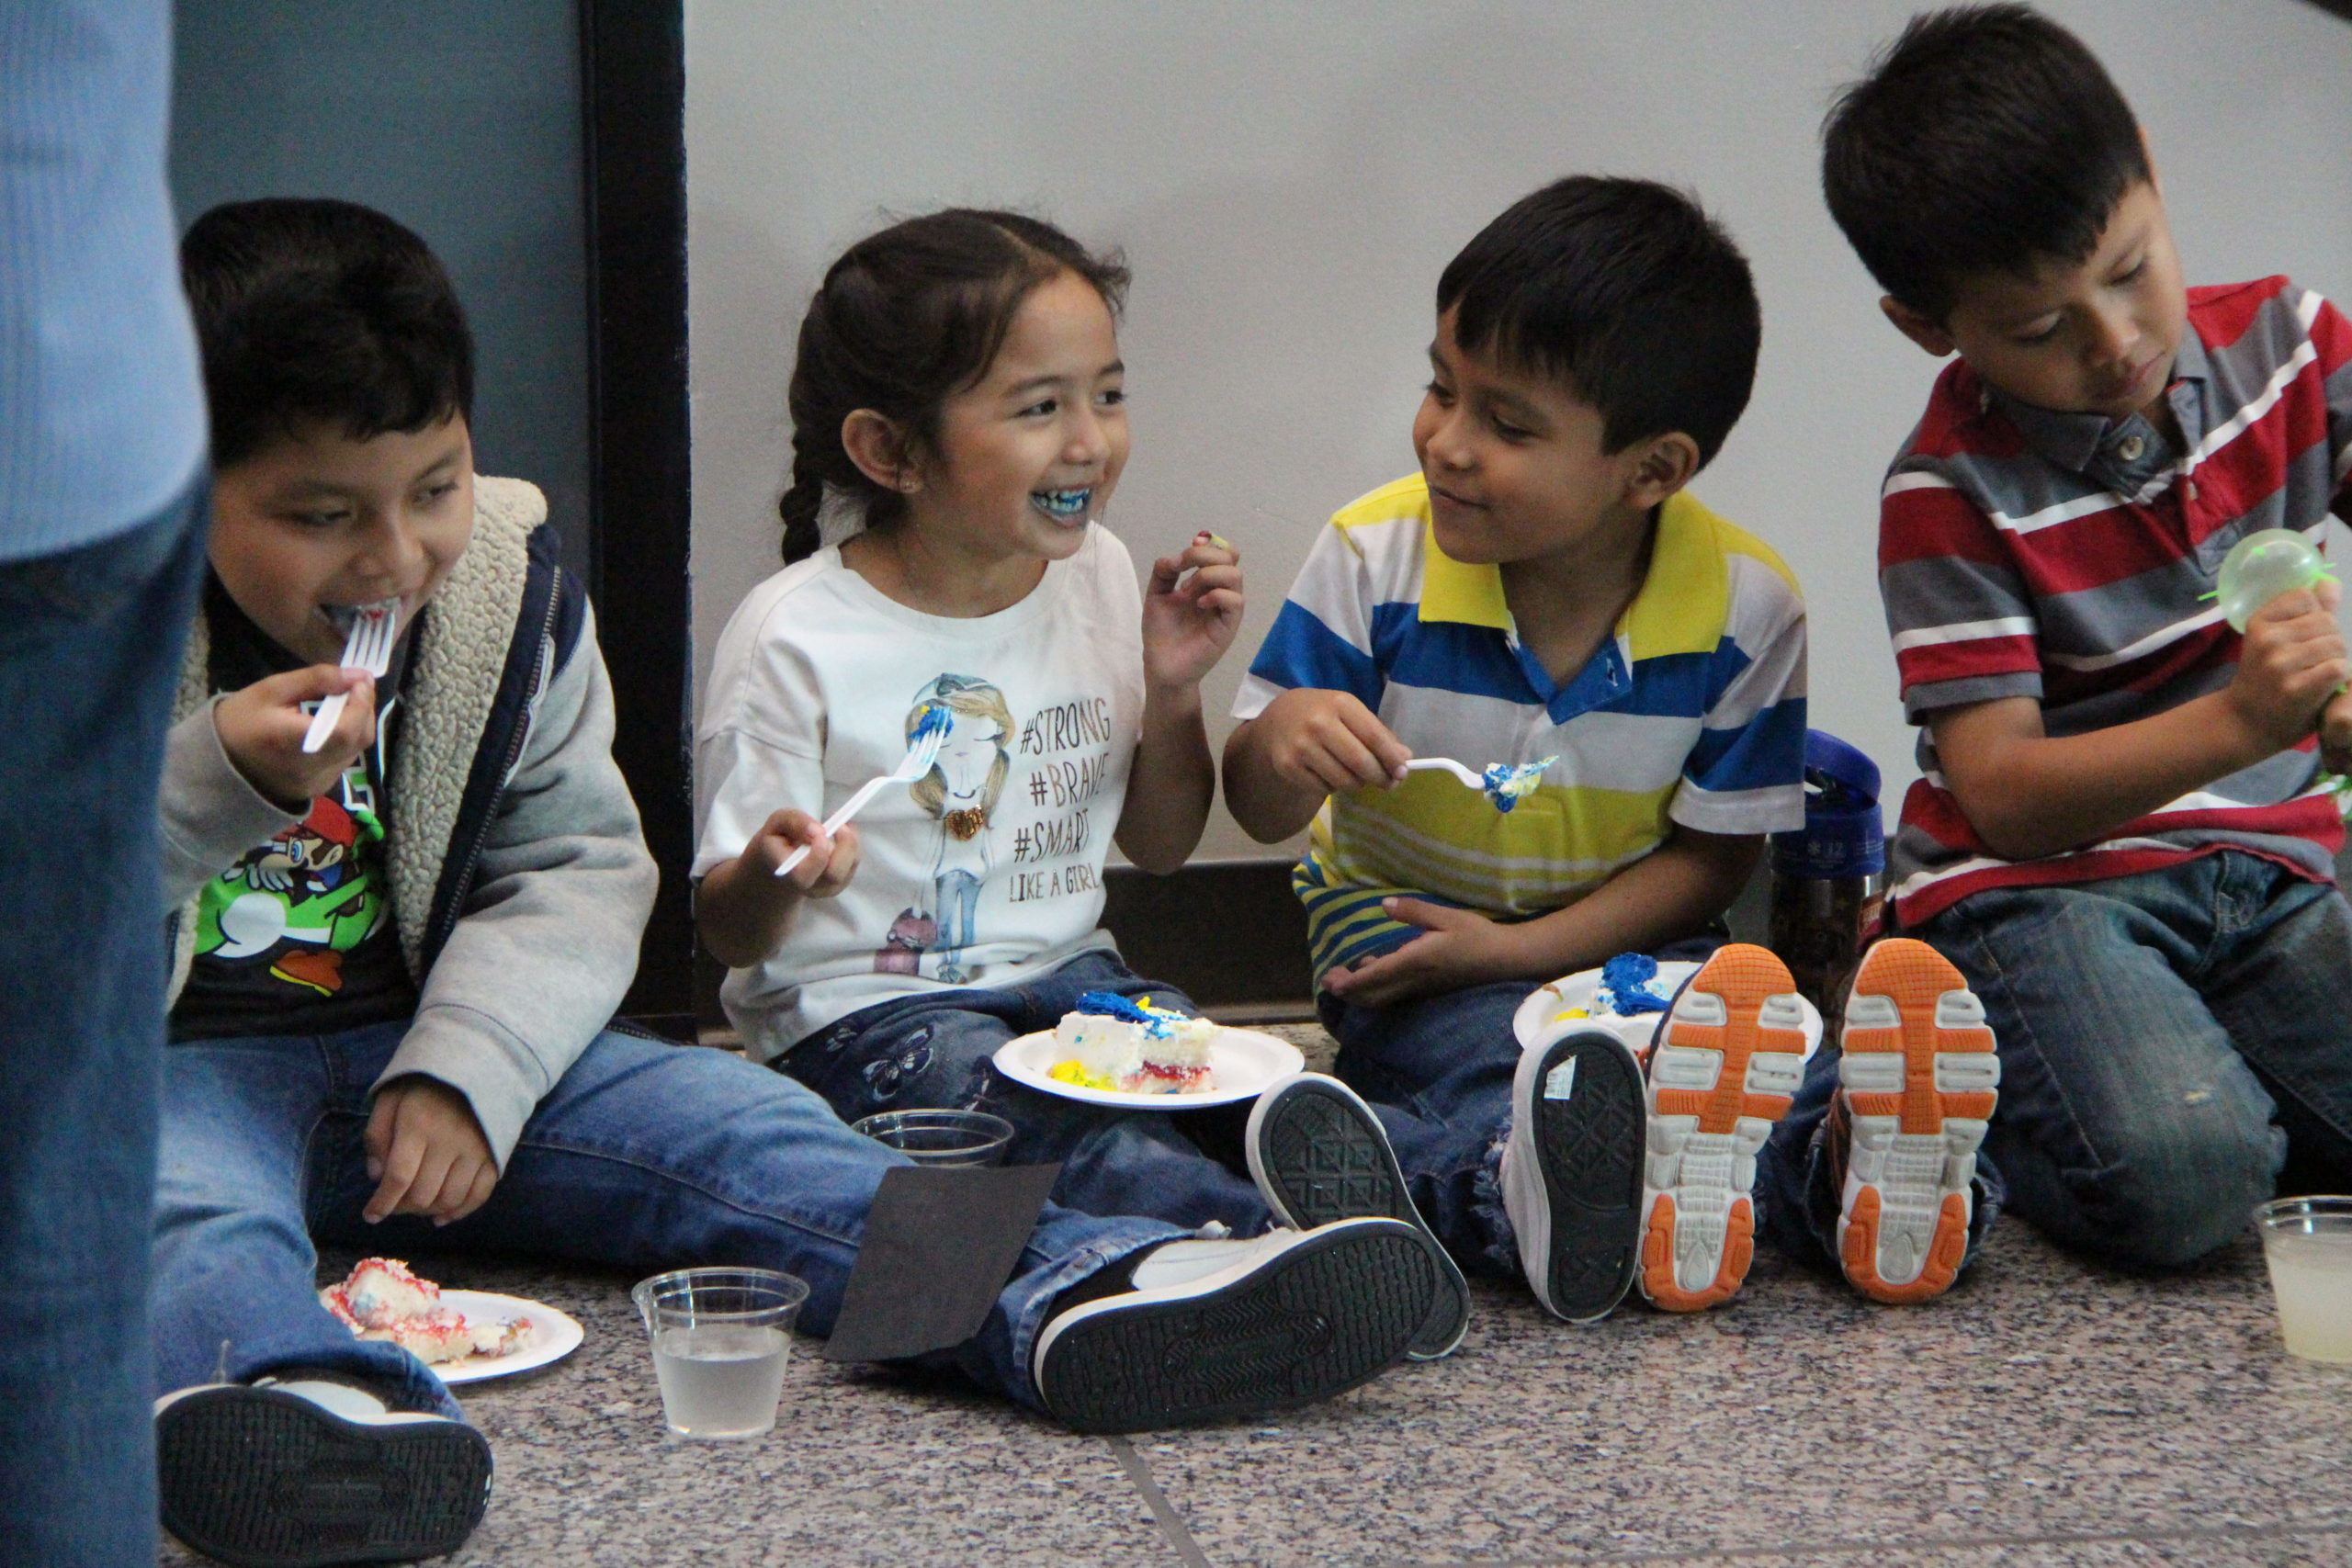 Young children eating cake